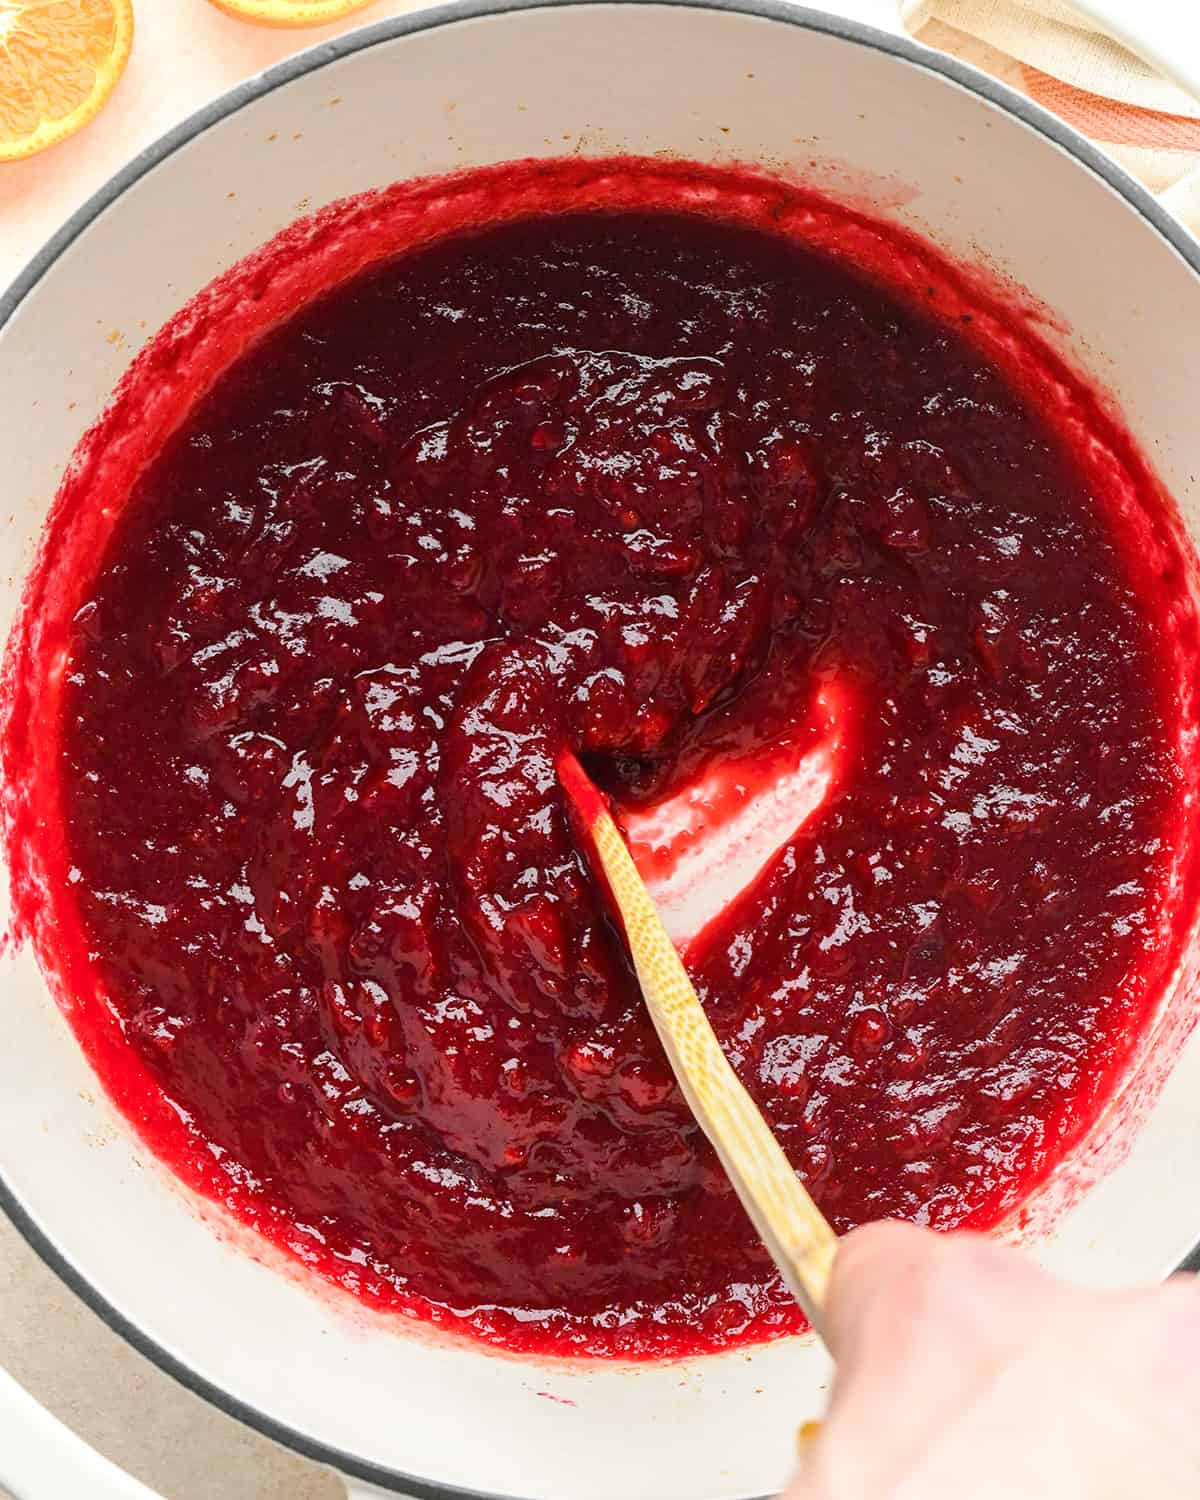 Homemade Cranberry Sauce Recipe in a saucepan after cooling